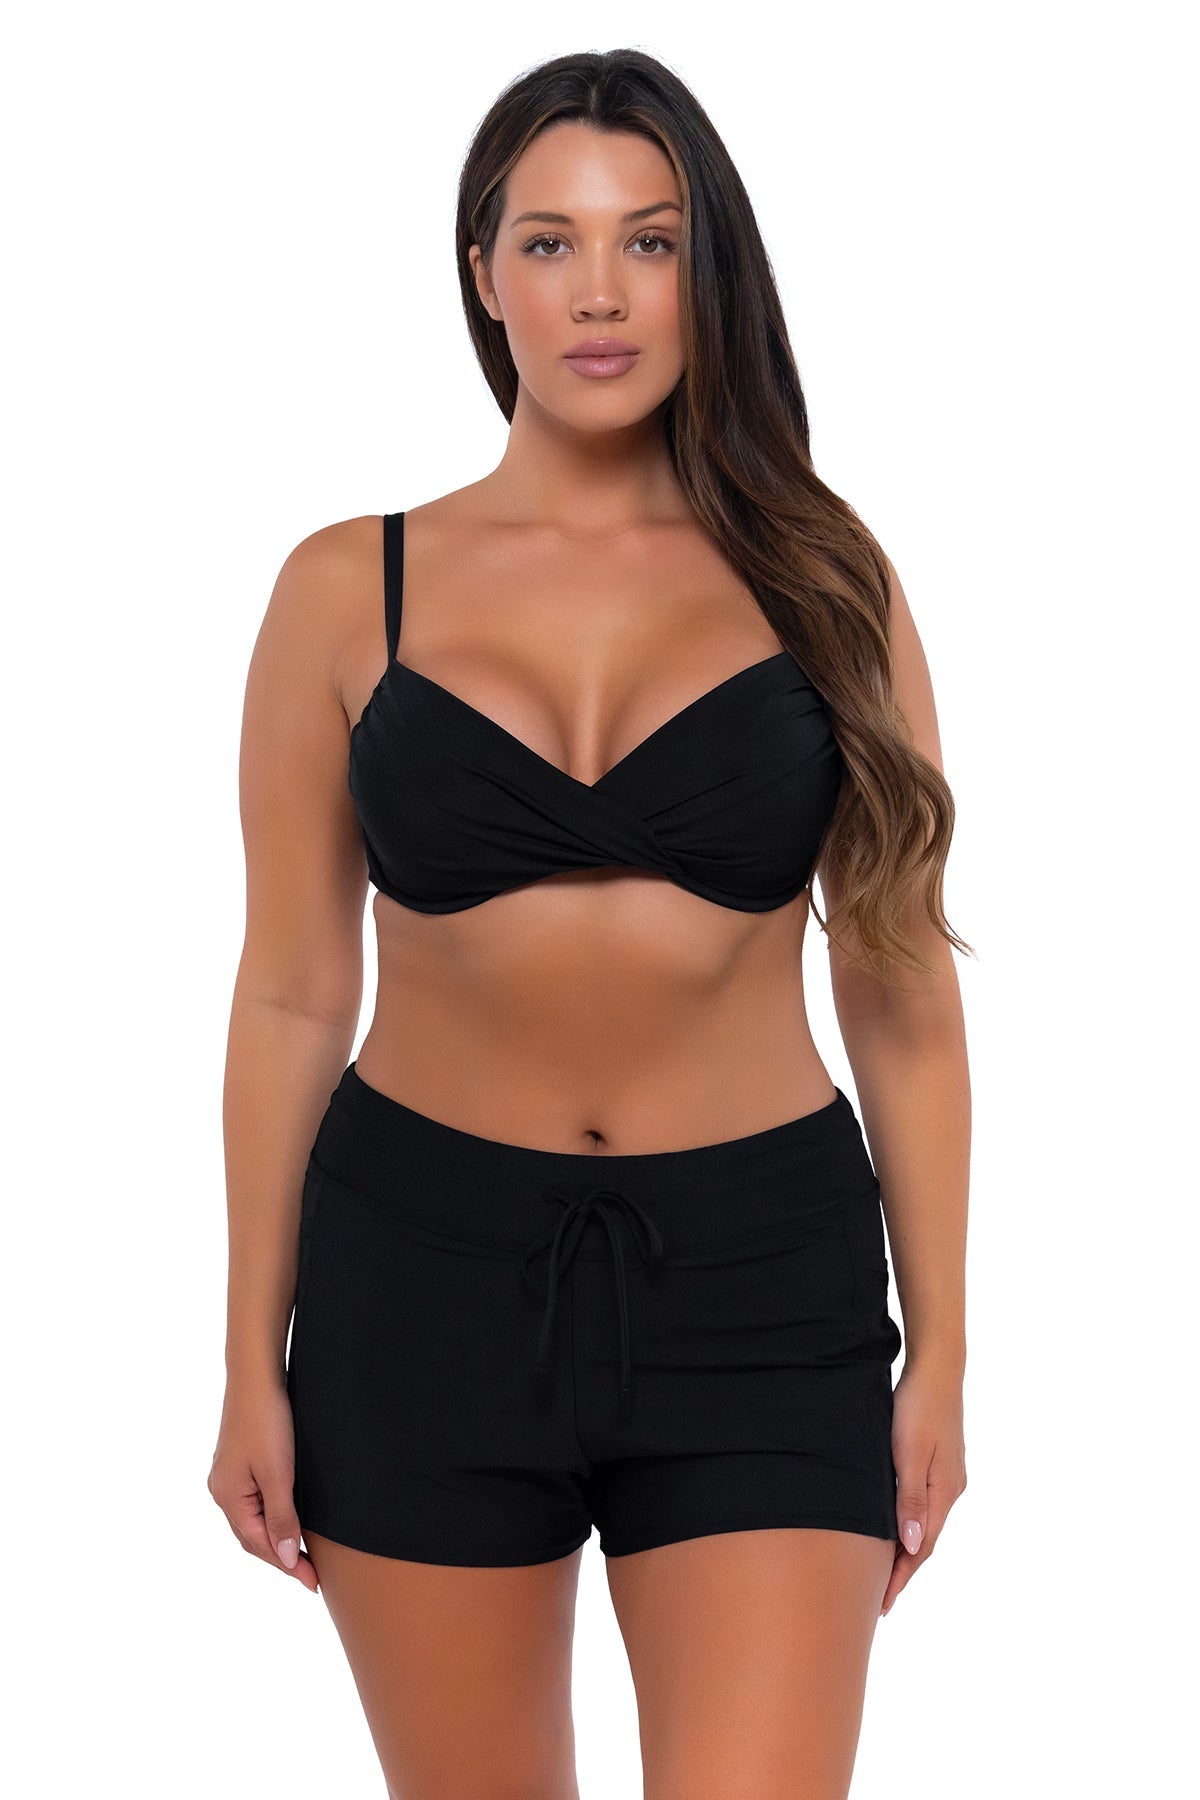 Plus Size Swimwear - Swimsuits & Bathing Suits for Plus Size - HauteFlair